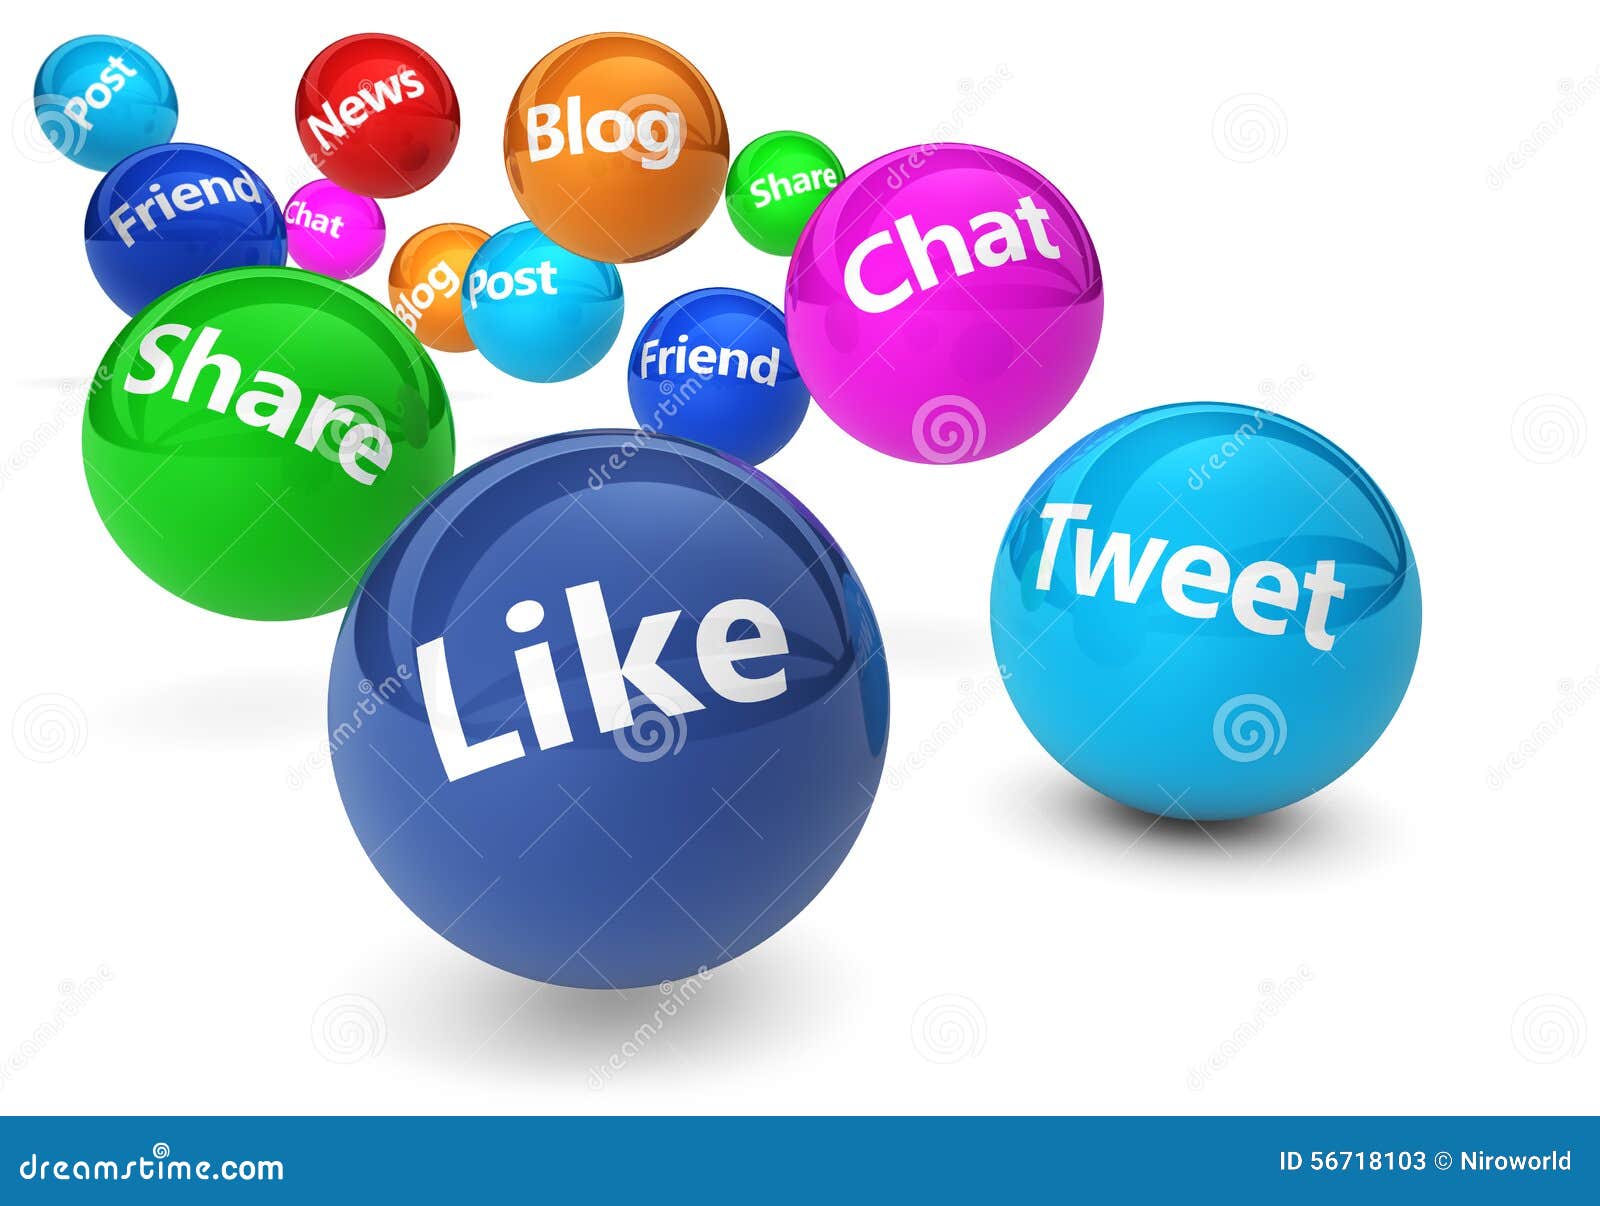 social network and web media concept